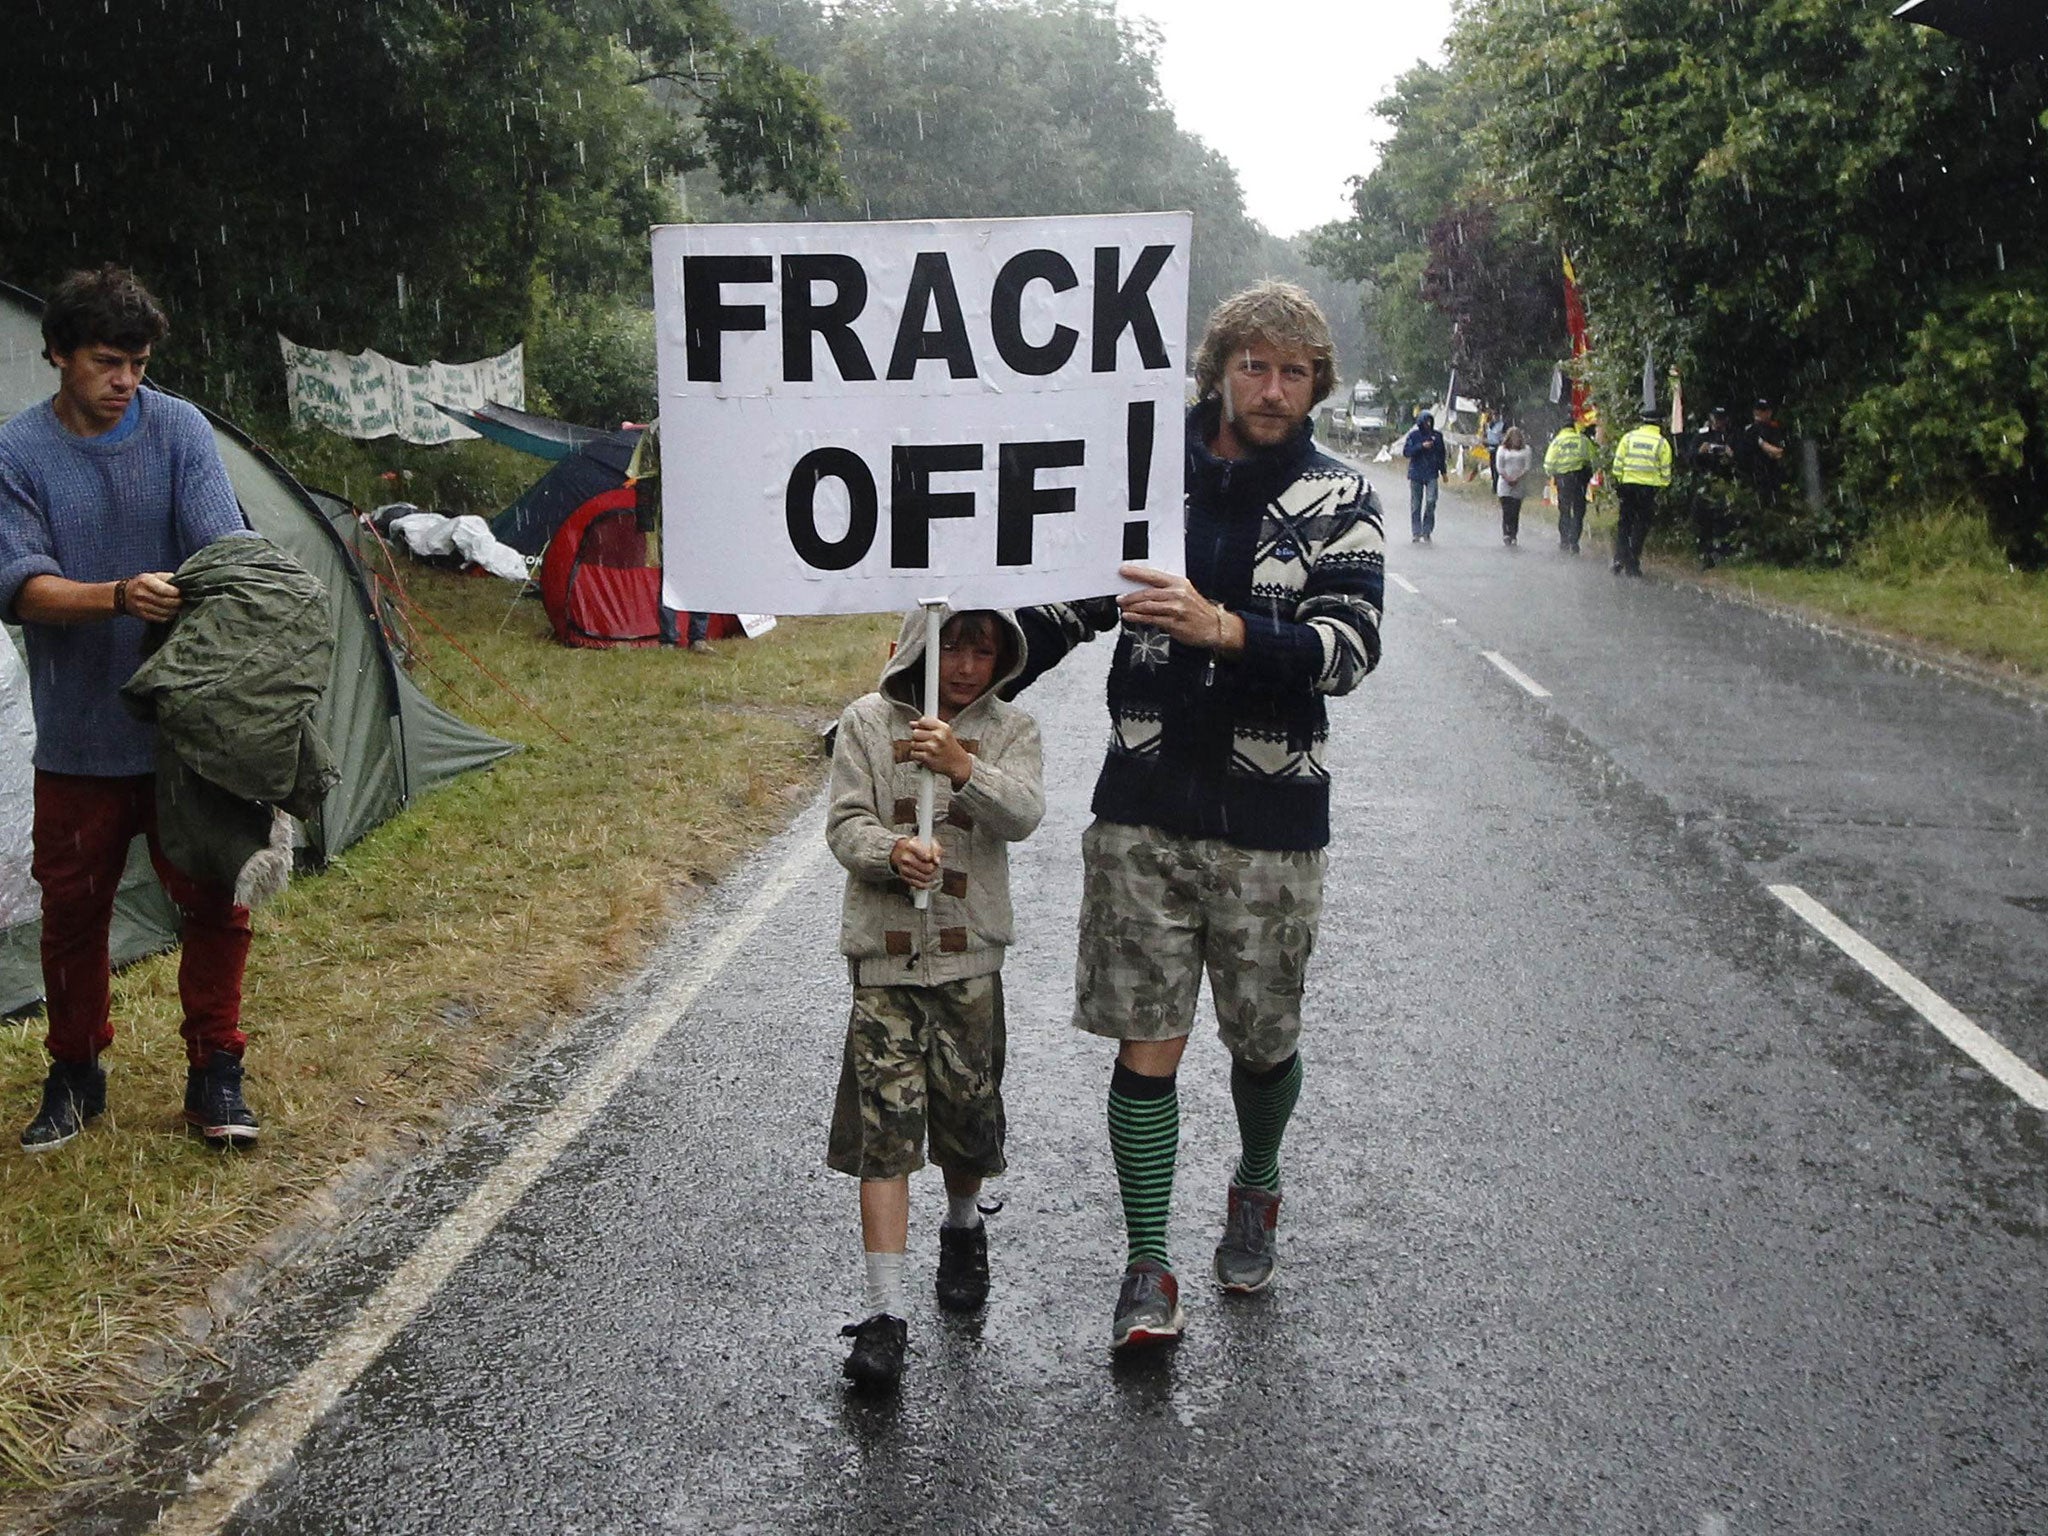 More than 1,000 opponents of fracking are expected to set up camp on the meadows off Preston New Road in Lancashire’s Fylde